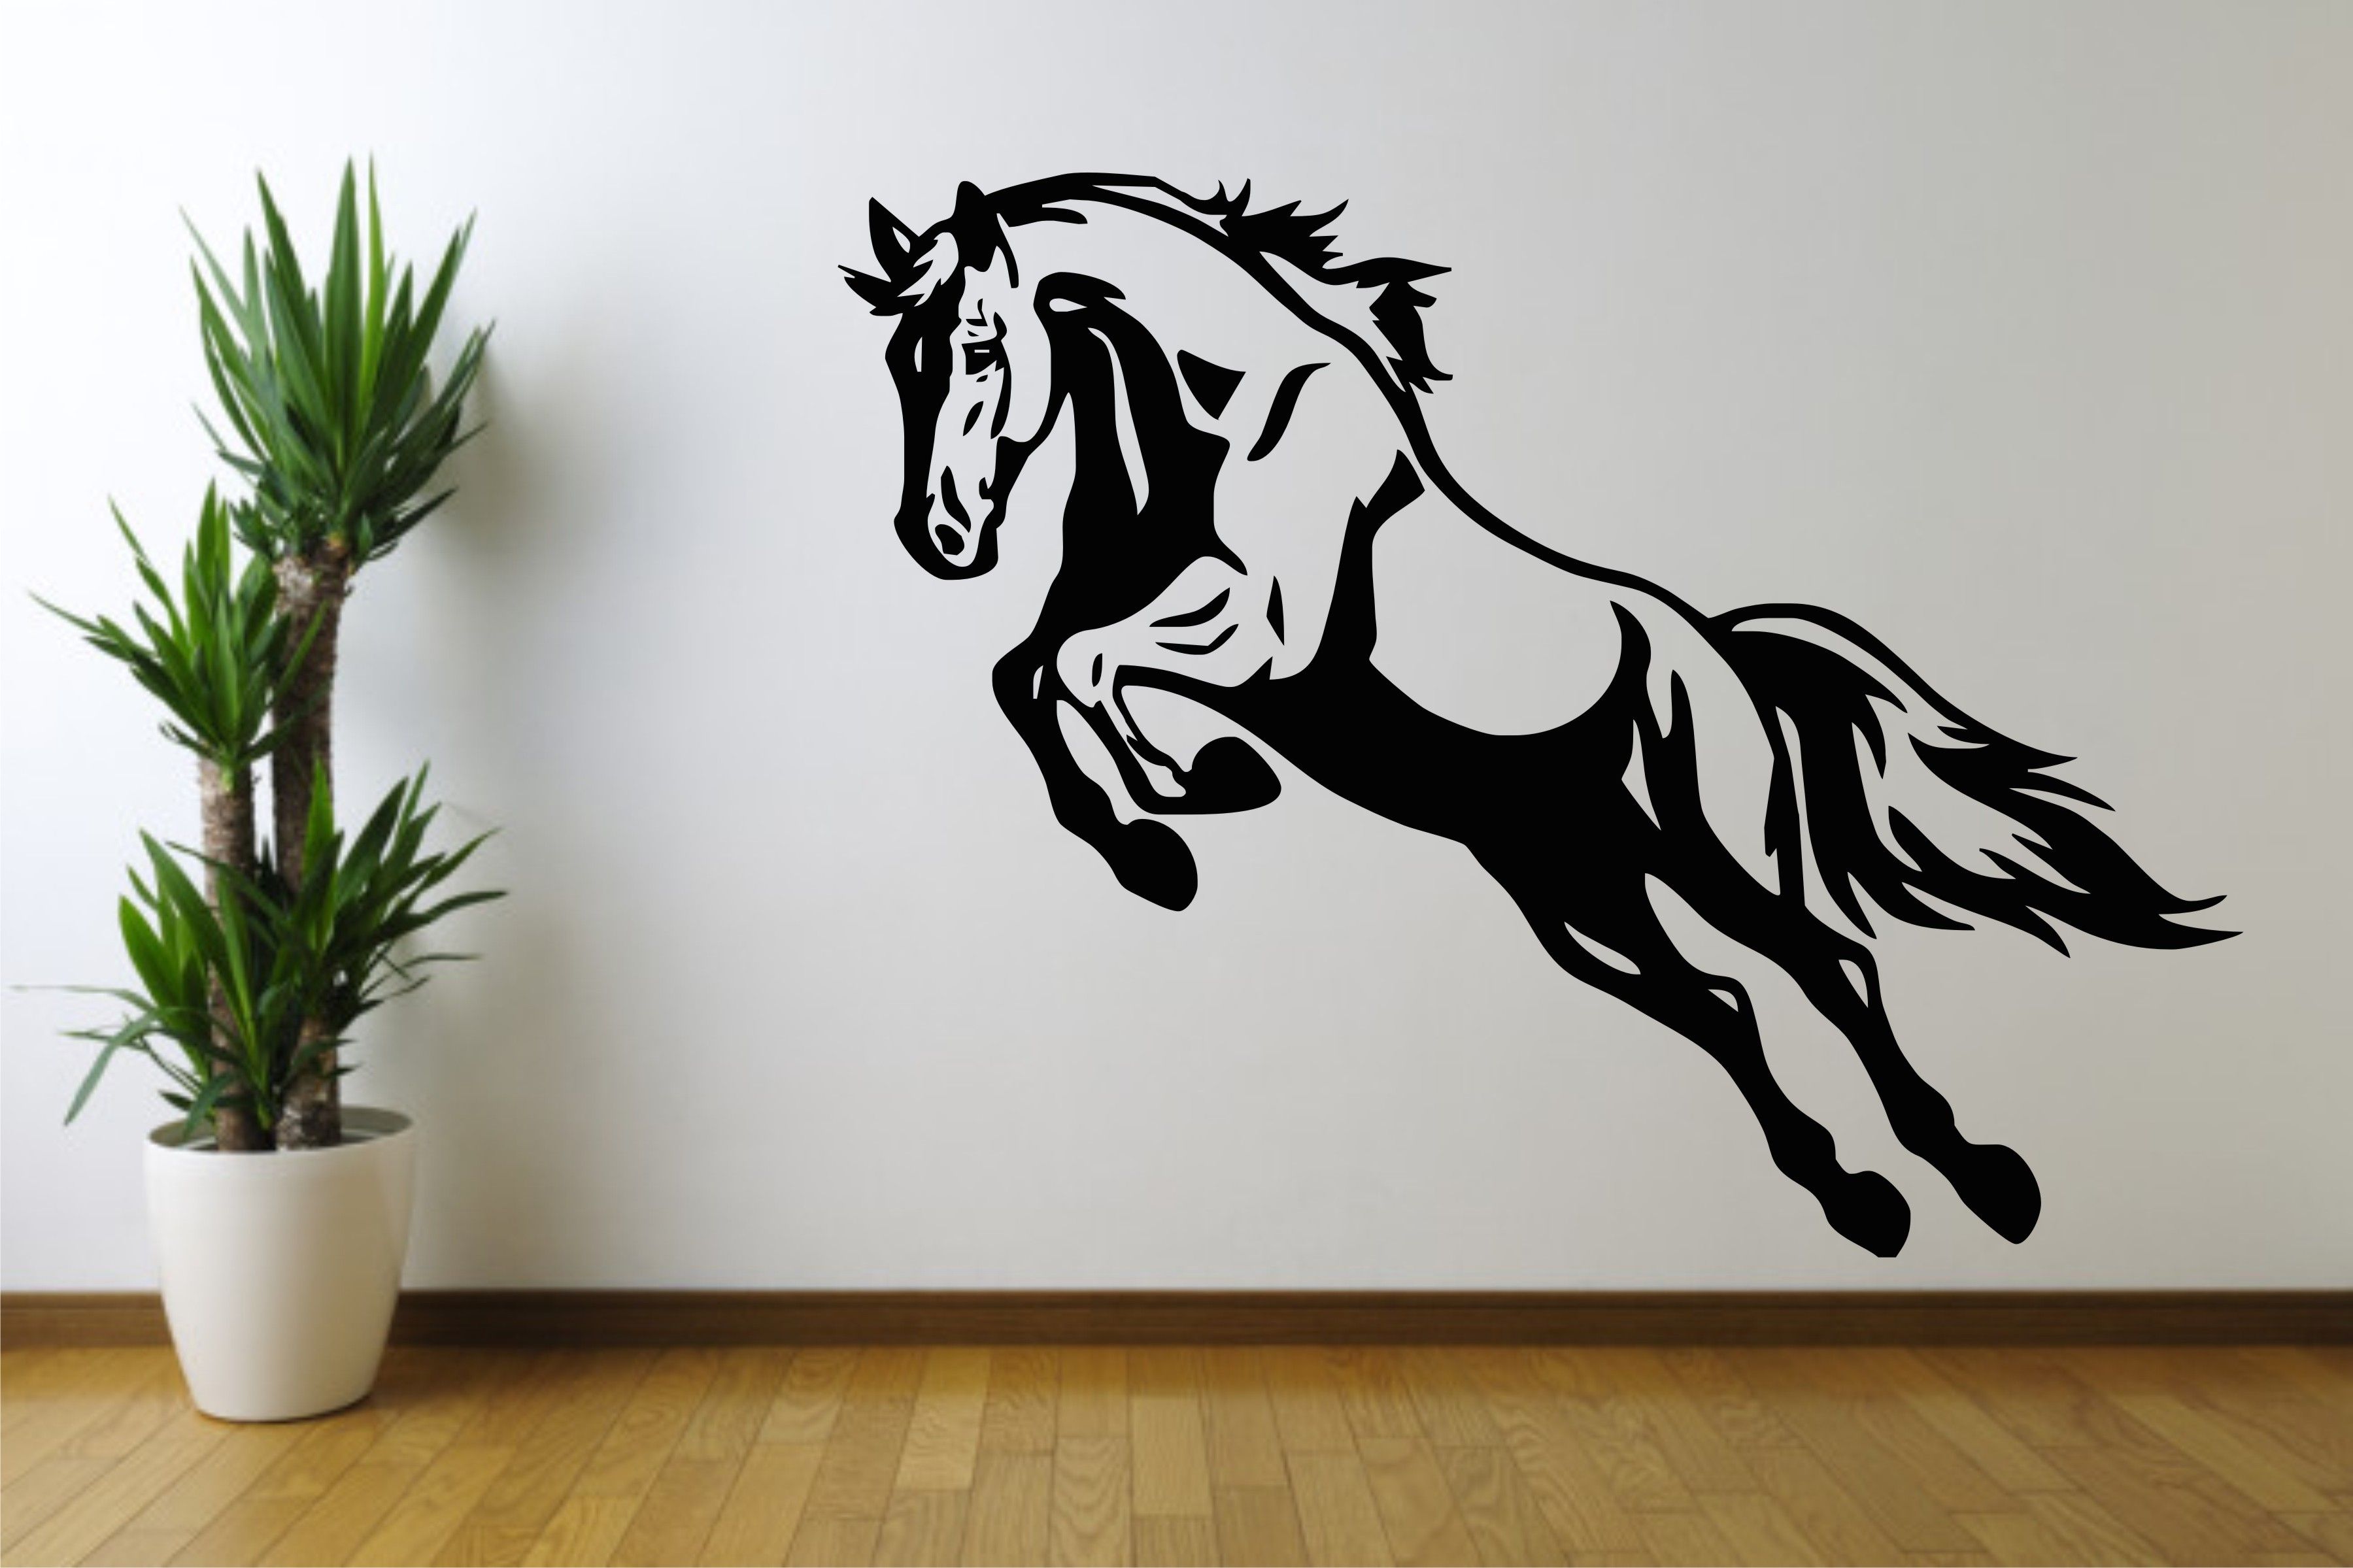 Affeda Good Horse Popular Horse Wall Decor – Wall Decoration And Intended For Horse Wall Art (View 13 of 20)